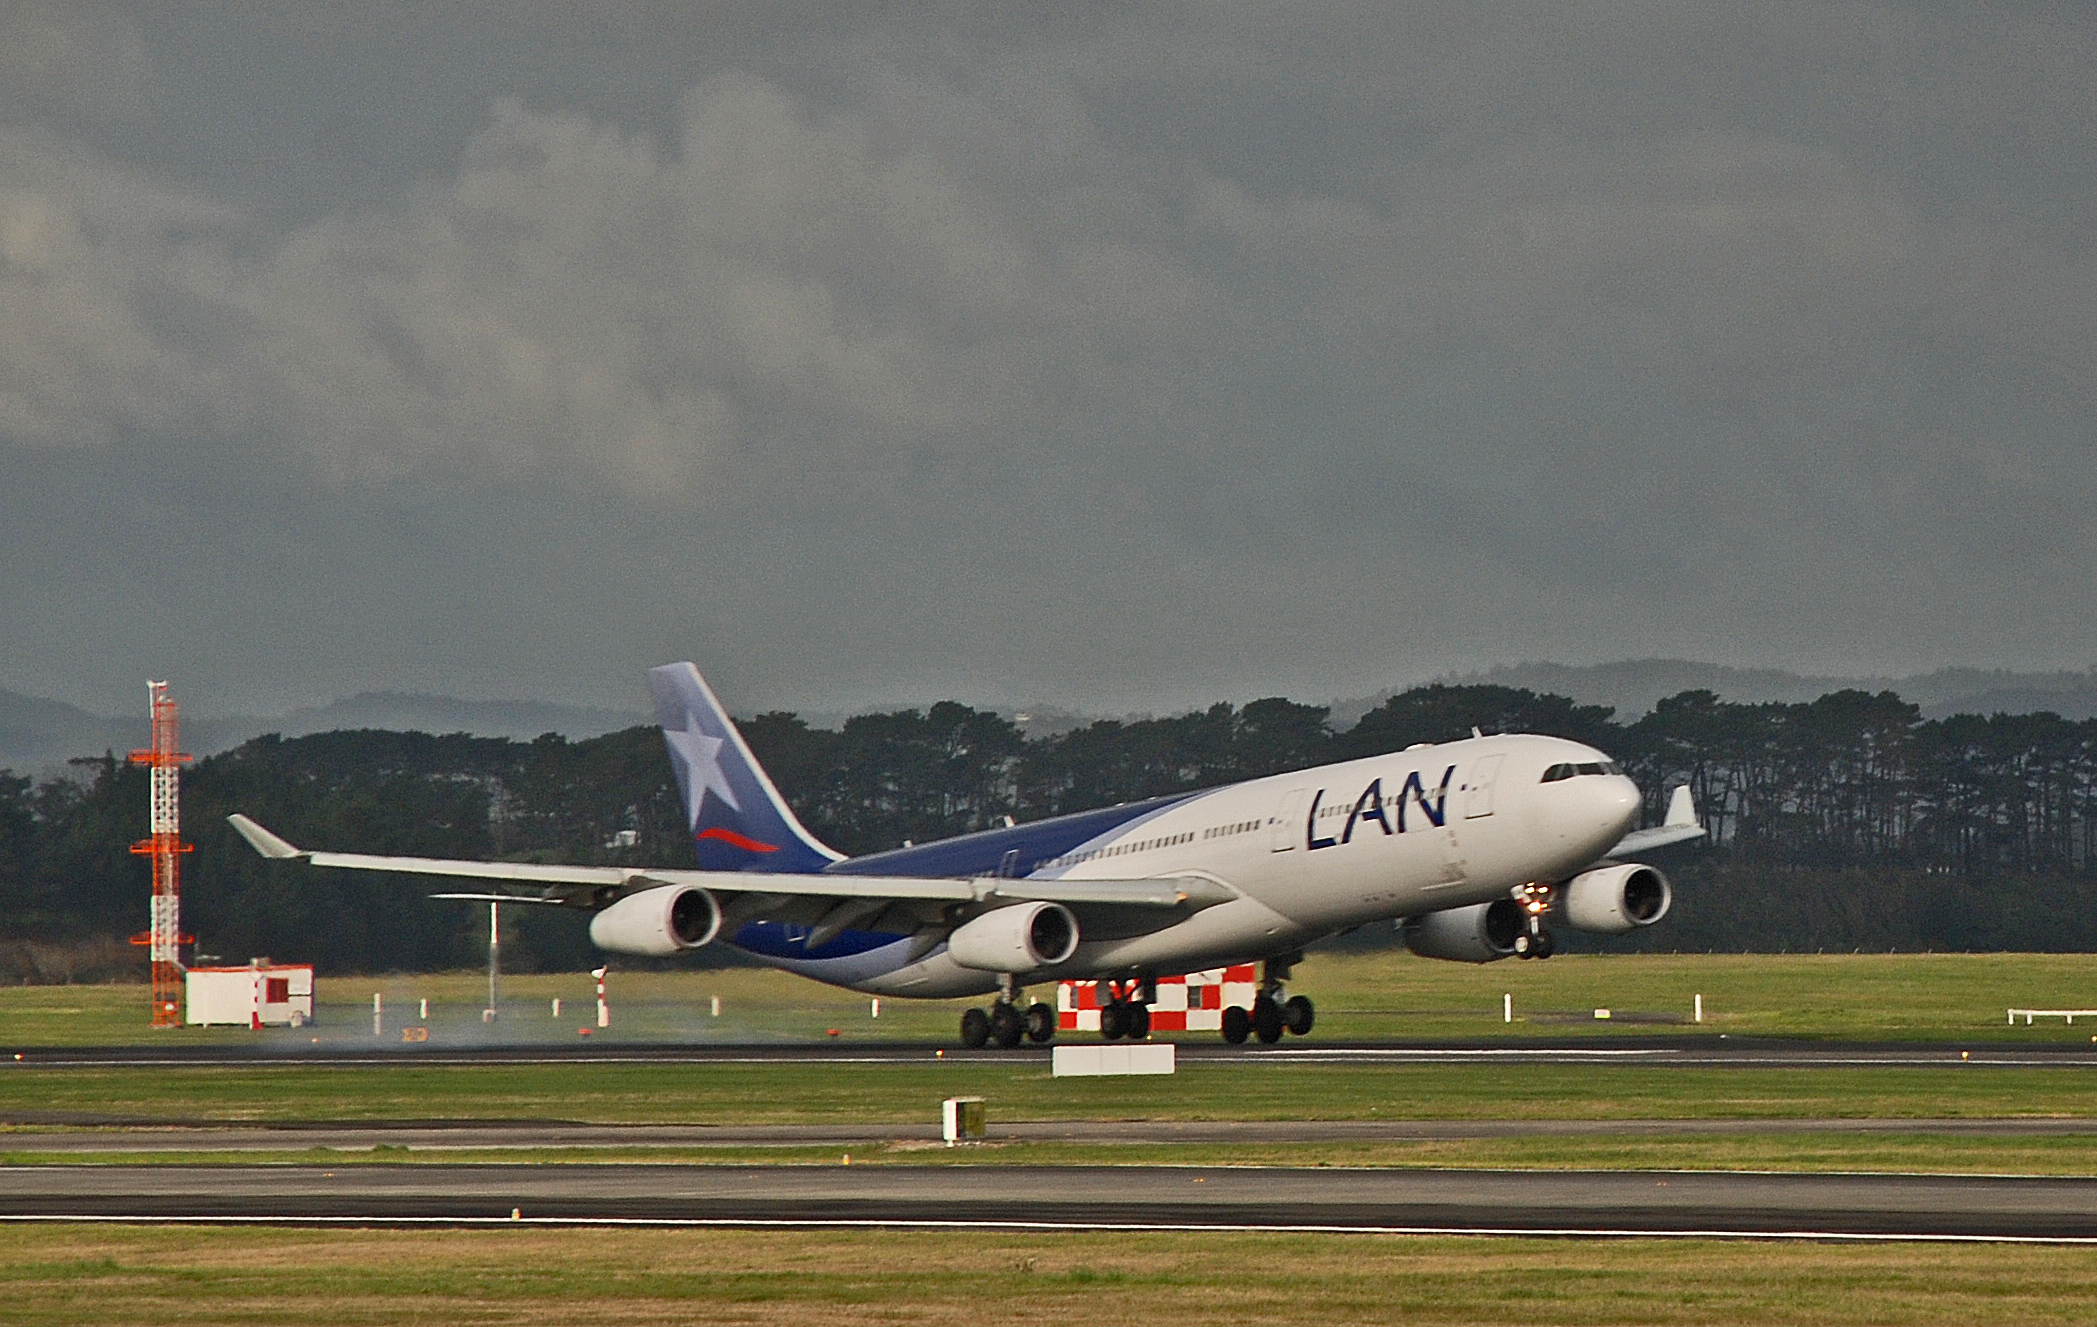 LAN Airlines Airbus A340-300 LANding at Auckland